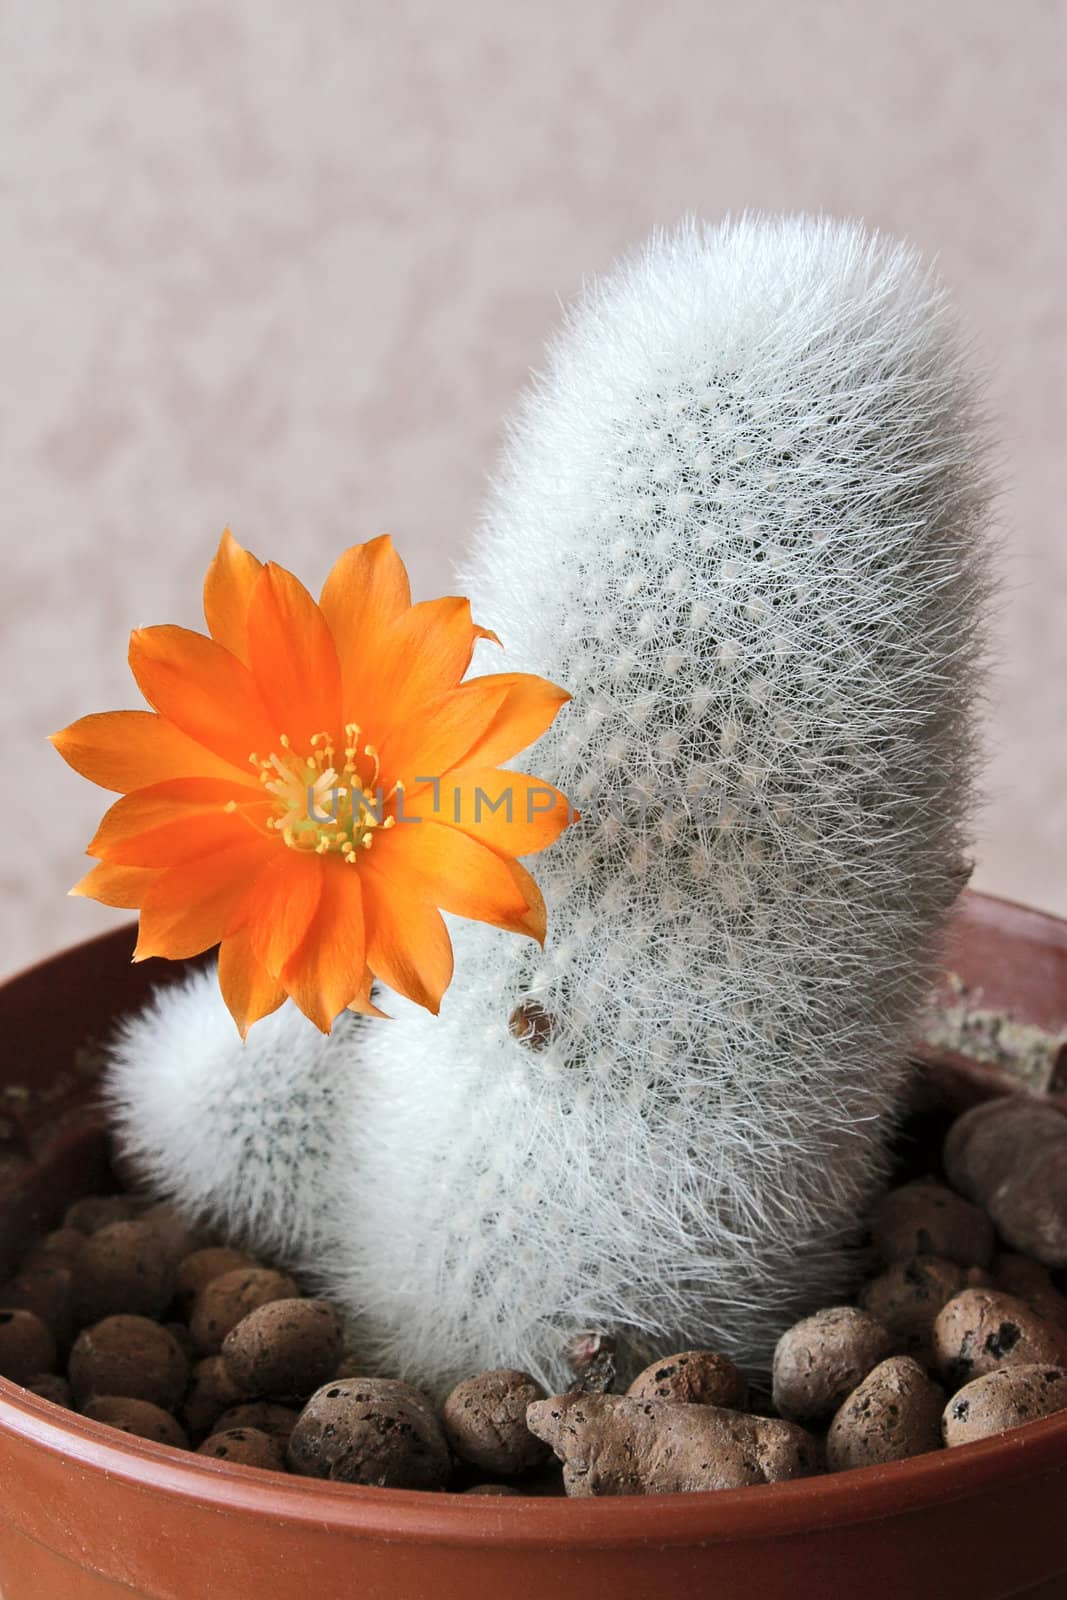 Blooming cactus by zhannaprokopeva